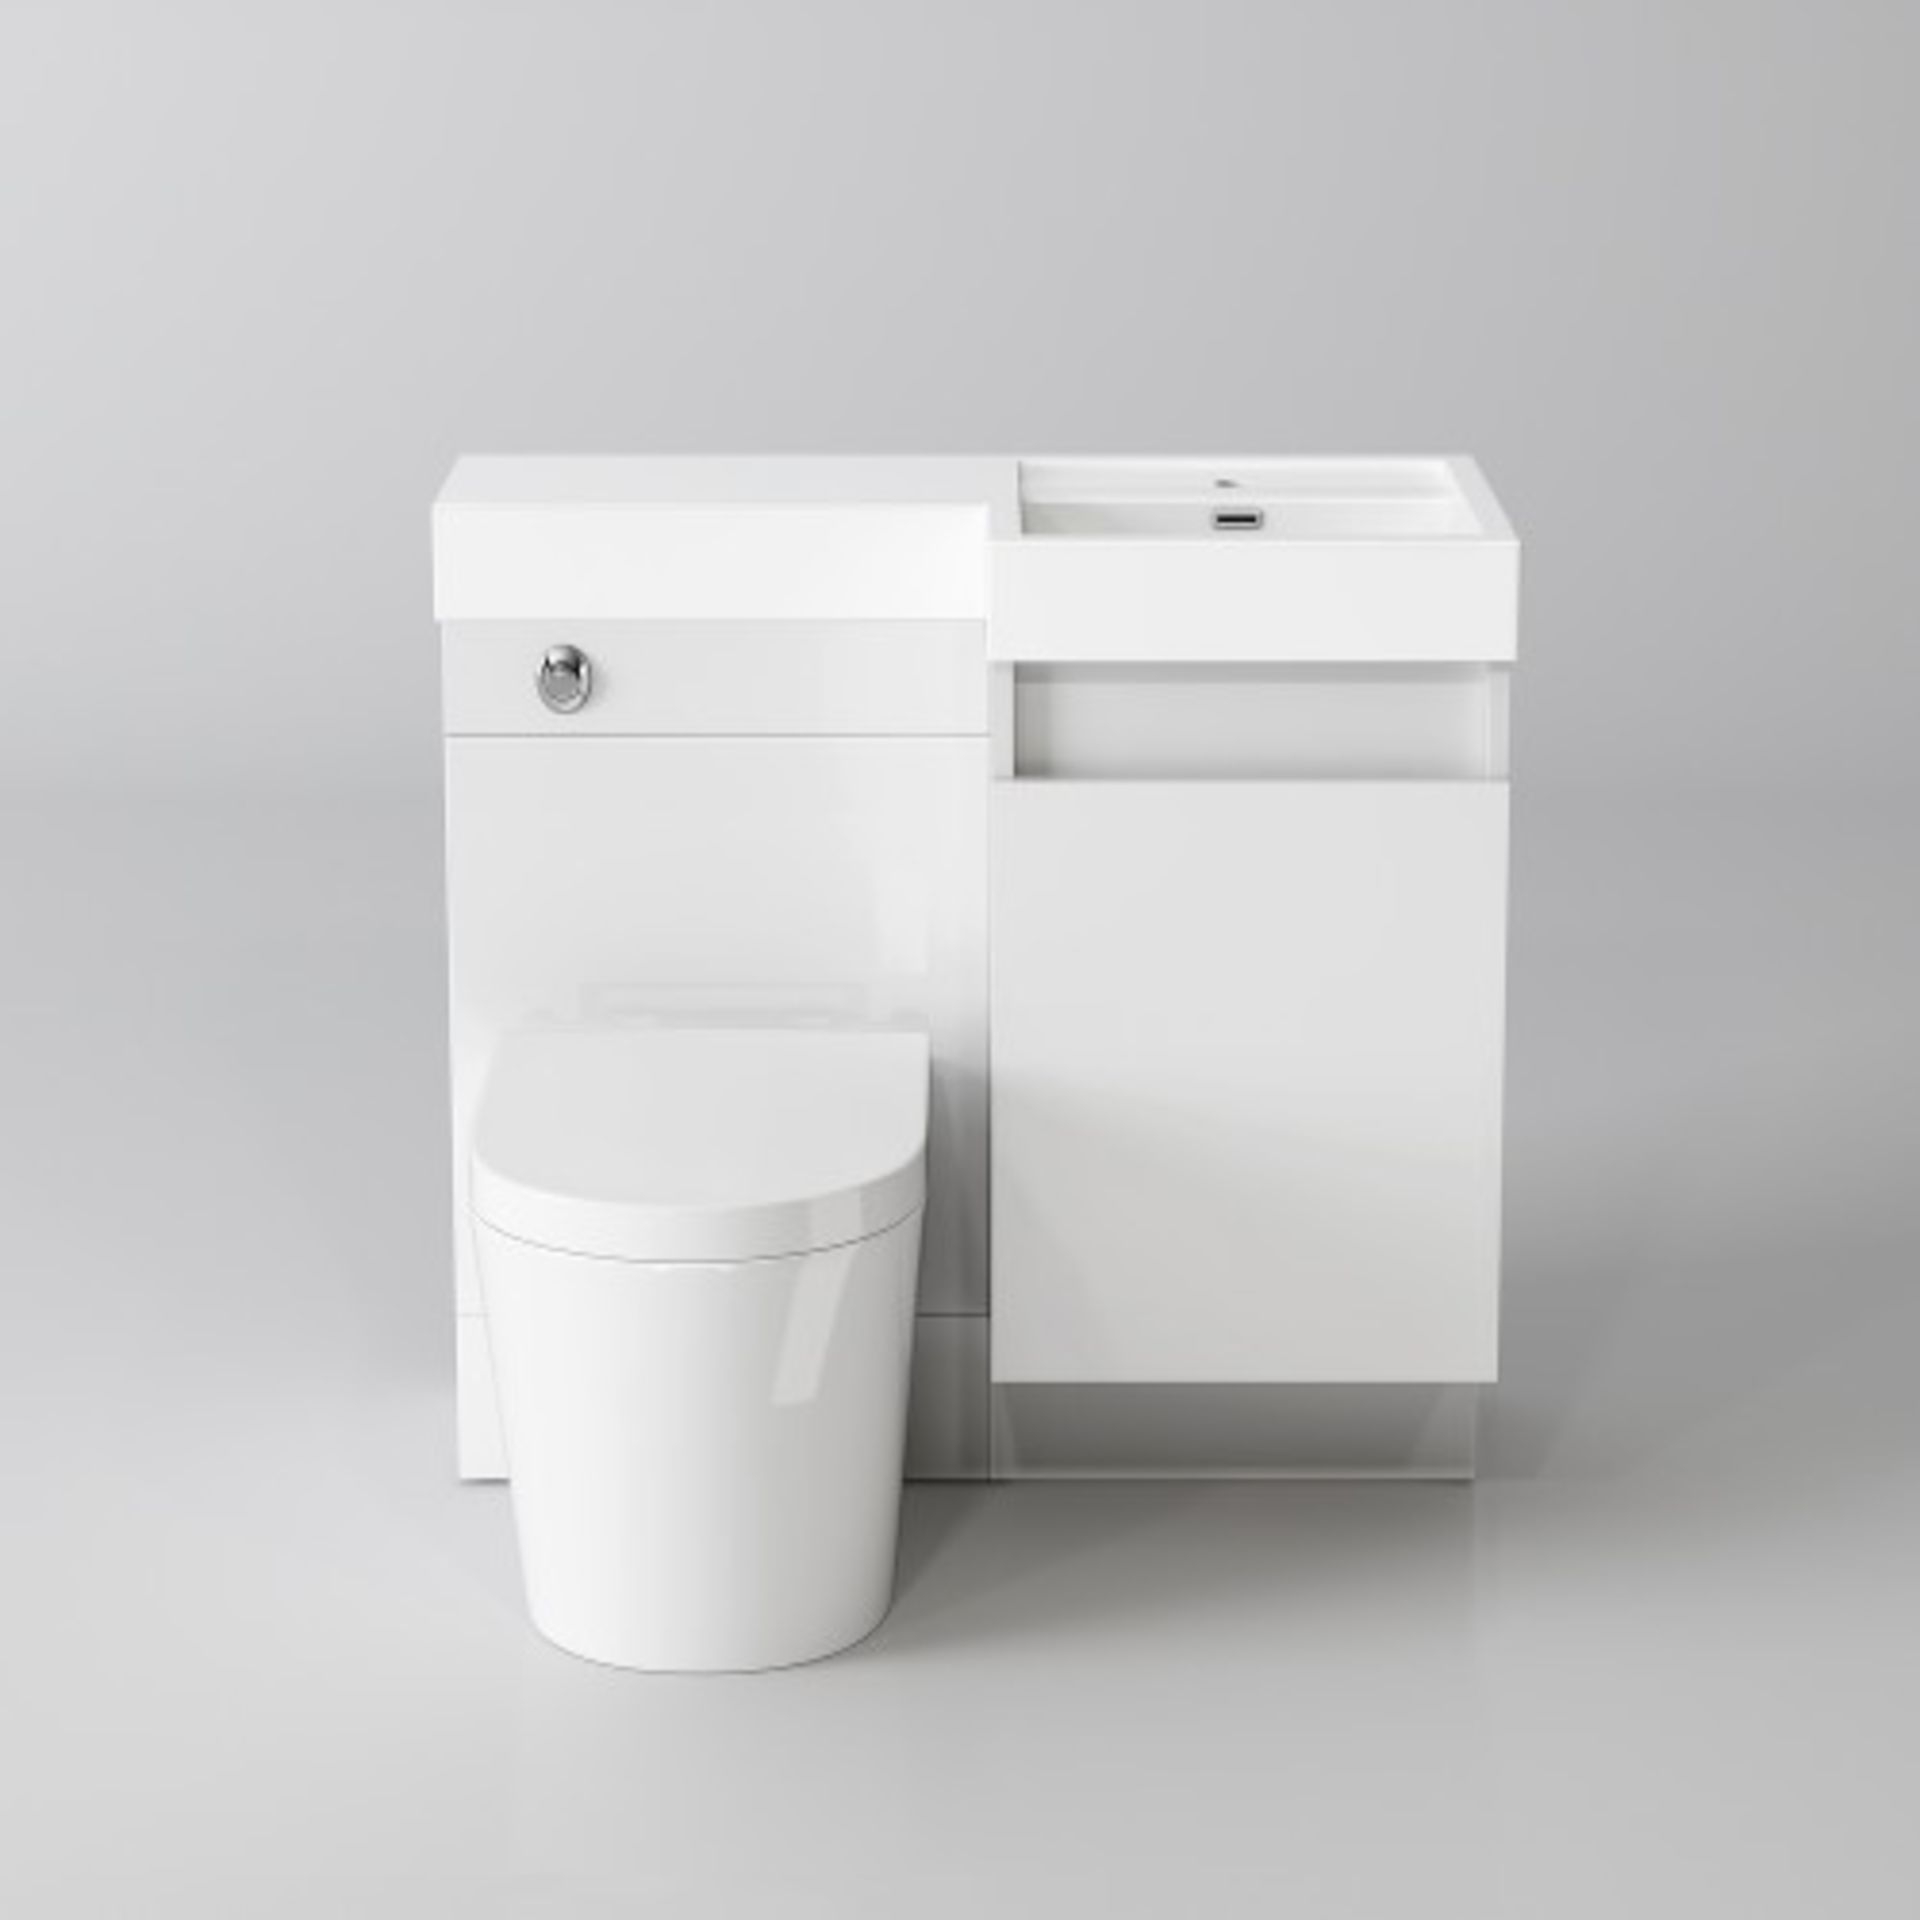 New & Boxed 906mm Olympia Gloss White Drawer Vanity Unit - Lyon Pan, Left Hand. Basin, Unit ... - Image 3 of 3